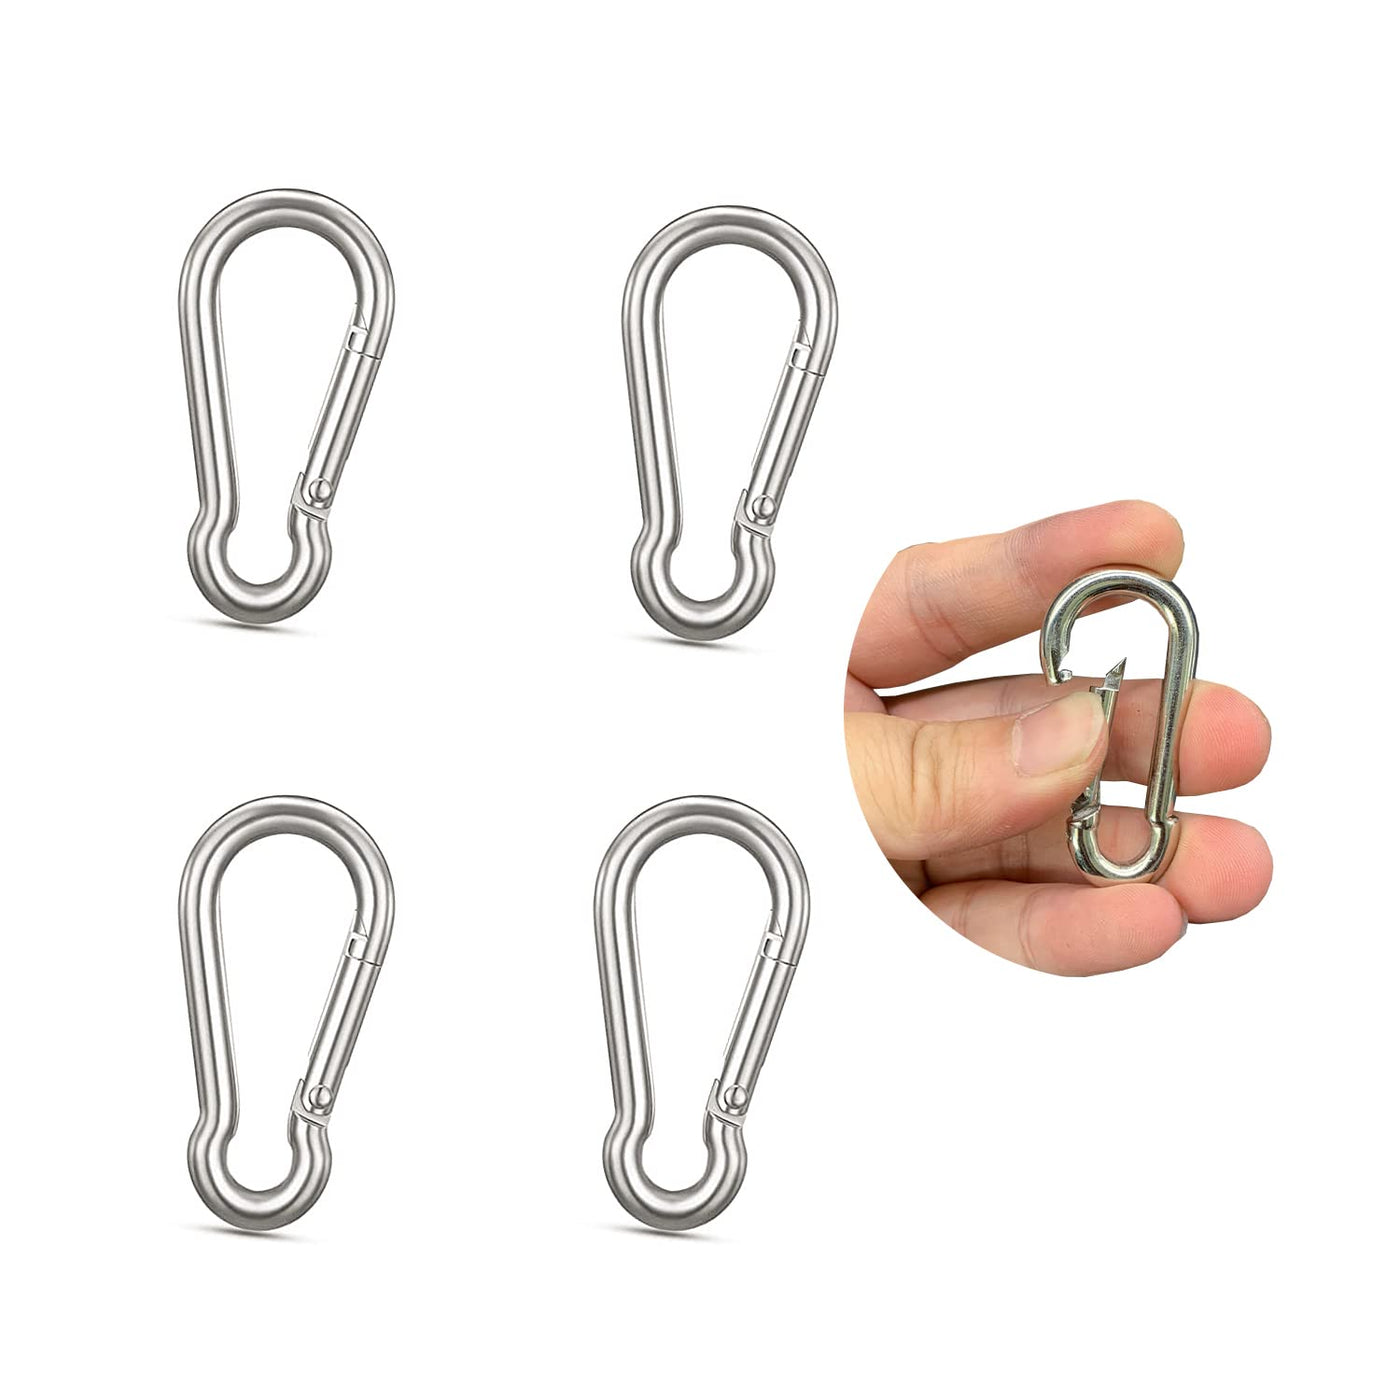 Snap Hook Small Carabiner Clip, Caribeener Clips, Heavy Duty Nickel Plated  Keychain Clips for Keys Swing Set Camping Fishing Hiking Traveling (1.96  inch, 4)